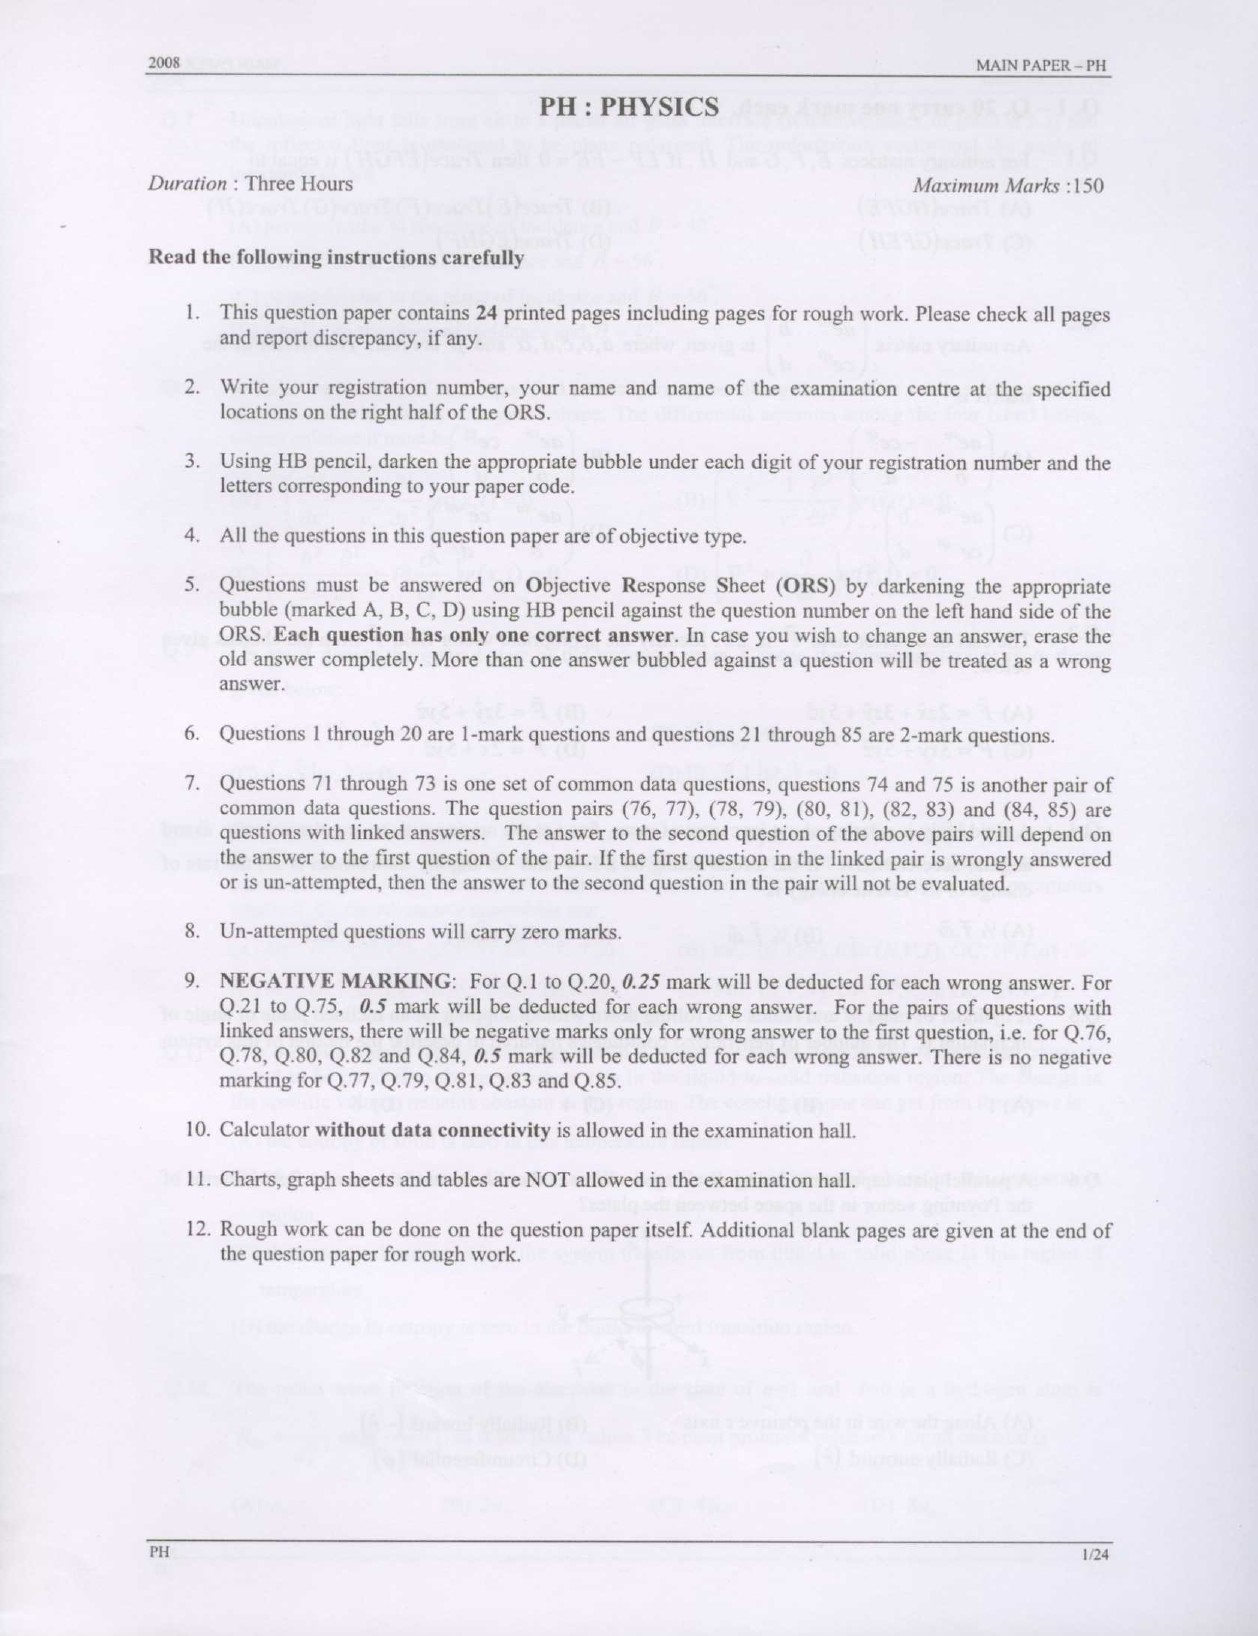 GATE Exam Question Paper 2008 Physics 1